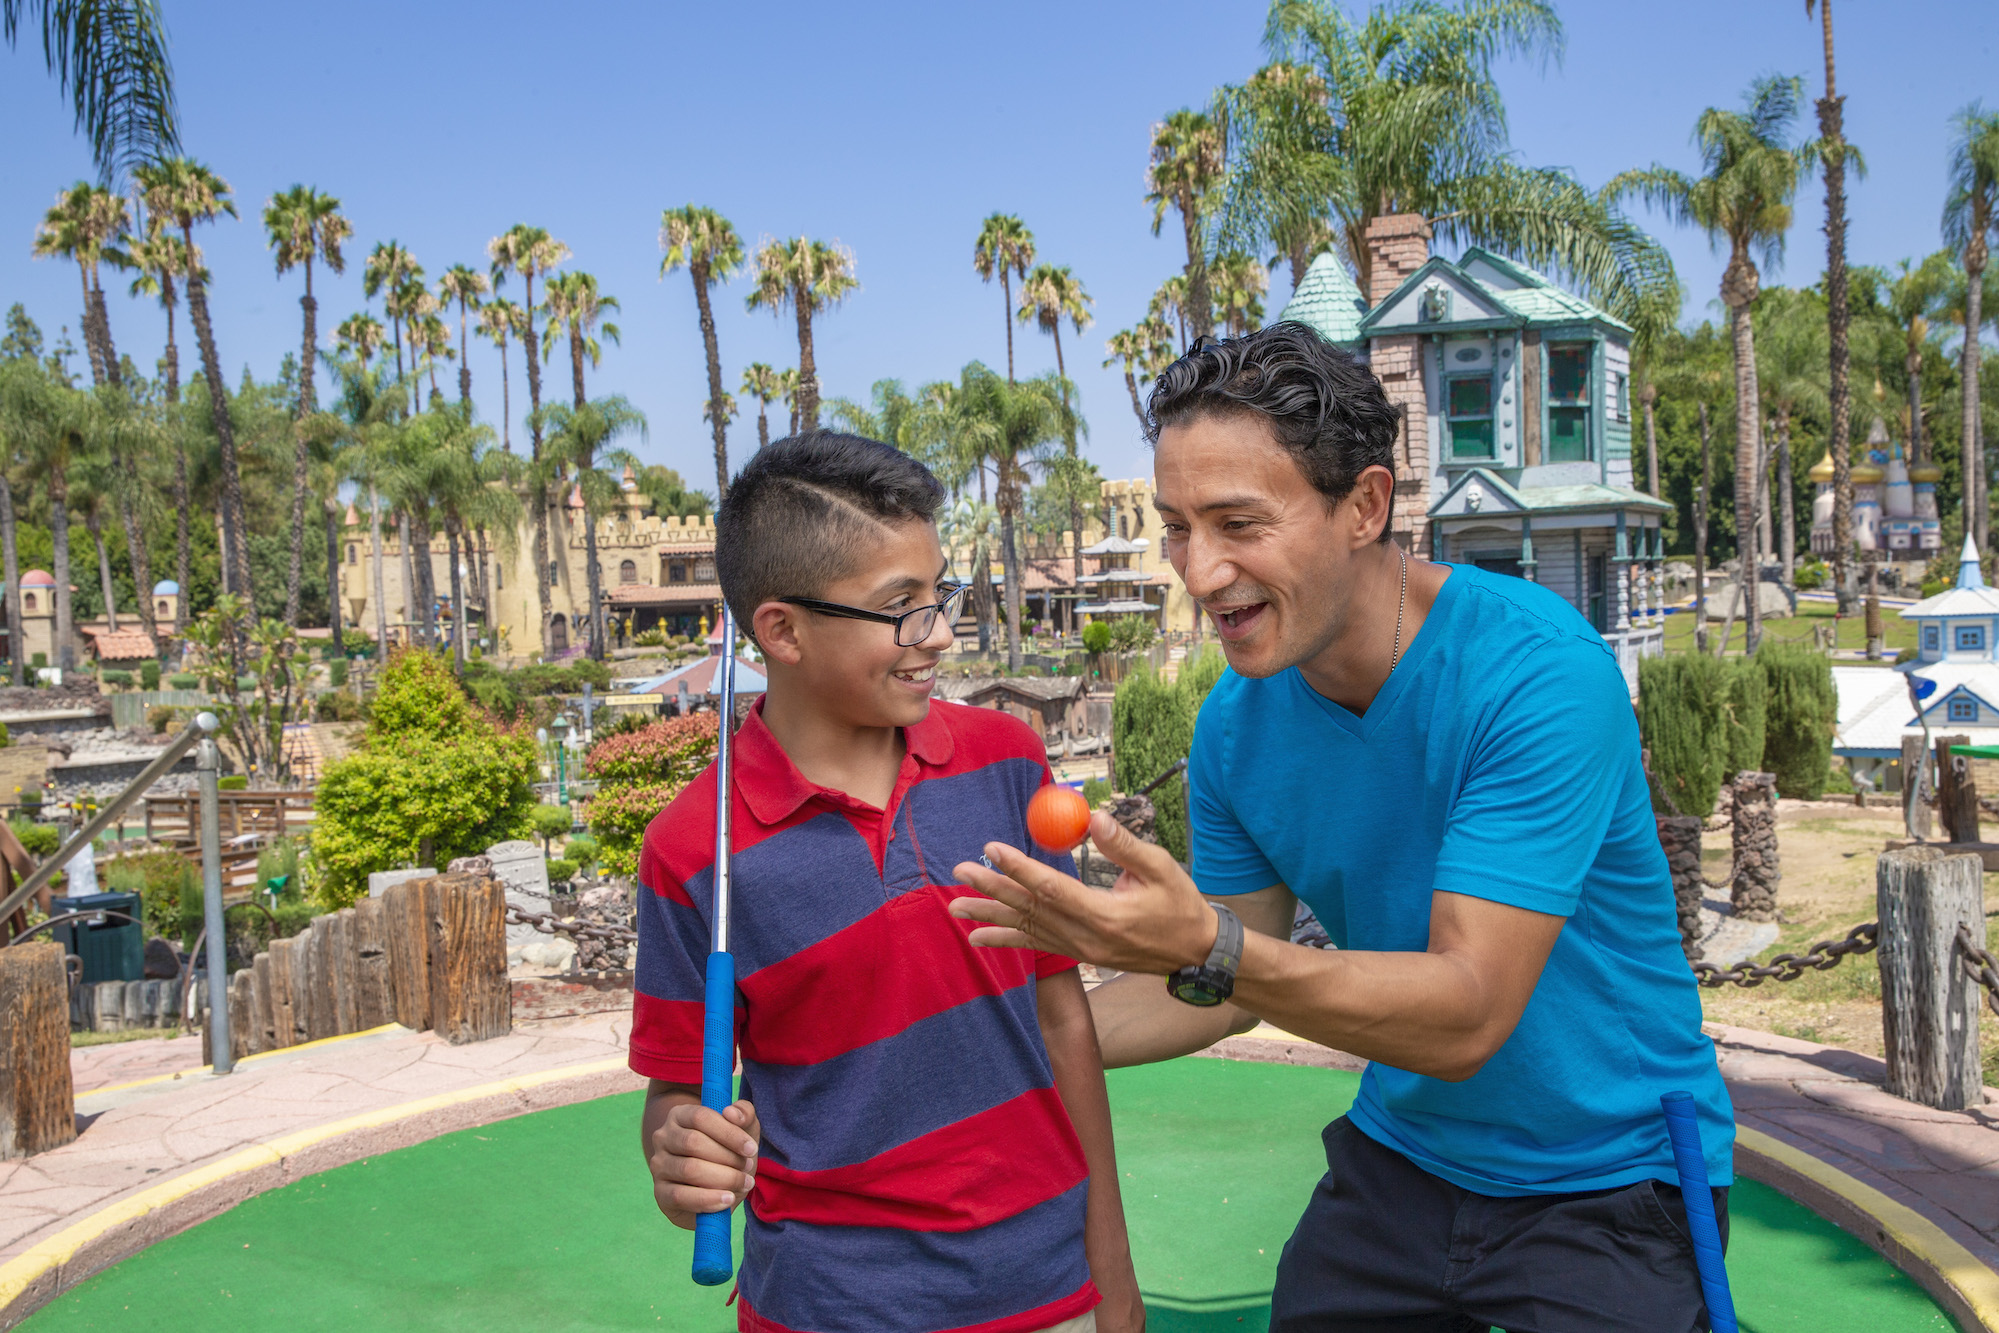 A man and his son playing miniature golf at Castle Park.